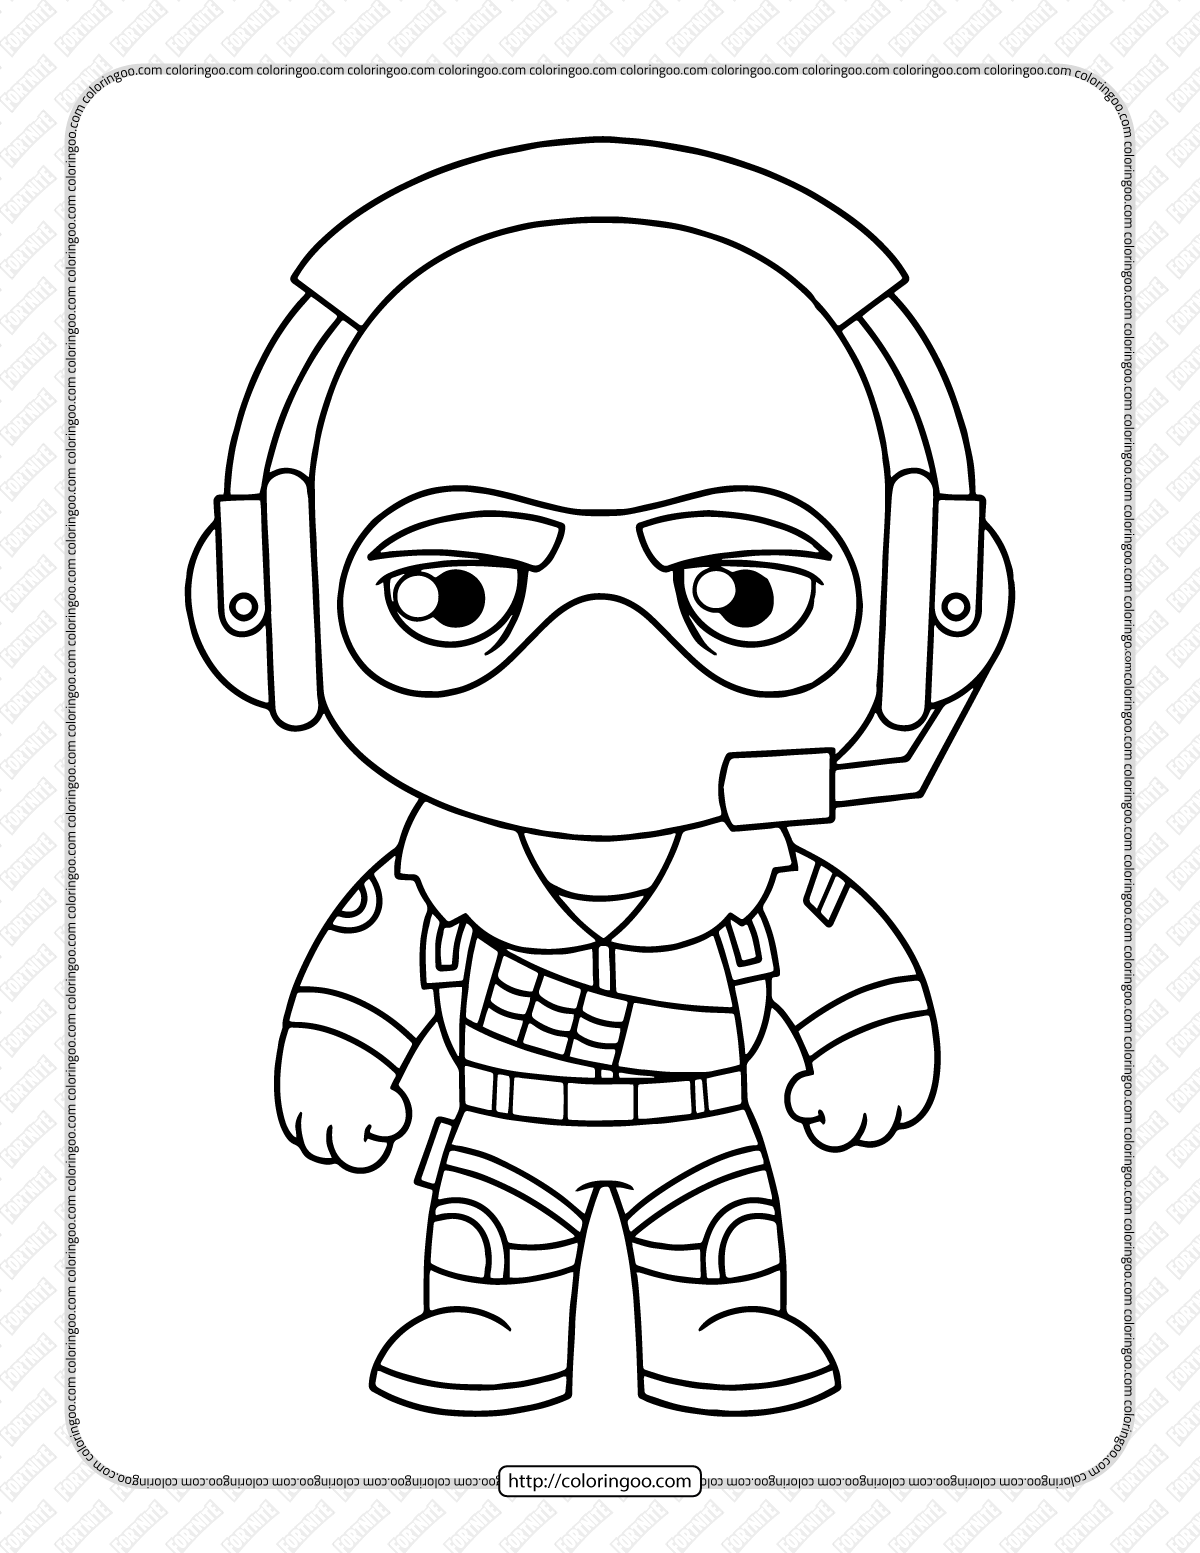 chibi fortnite coloring pages 36